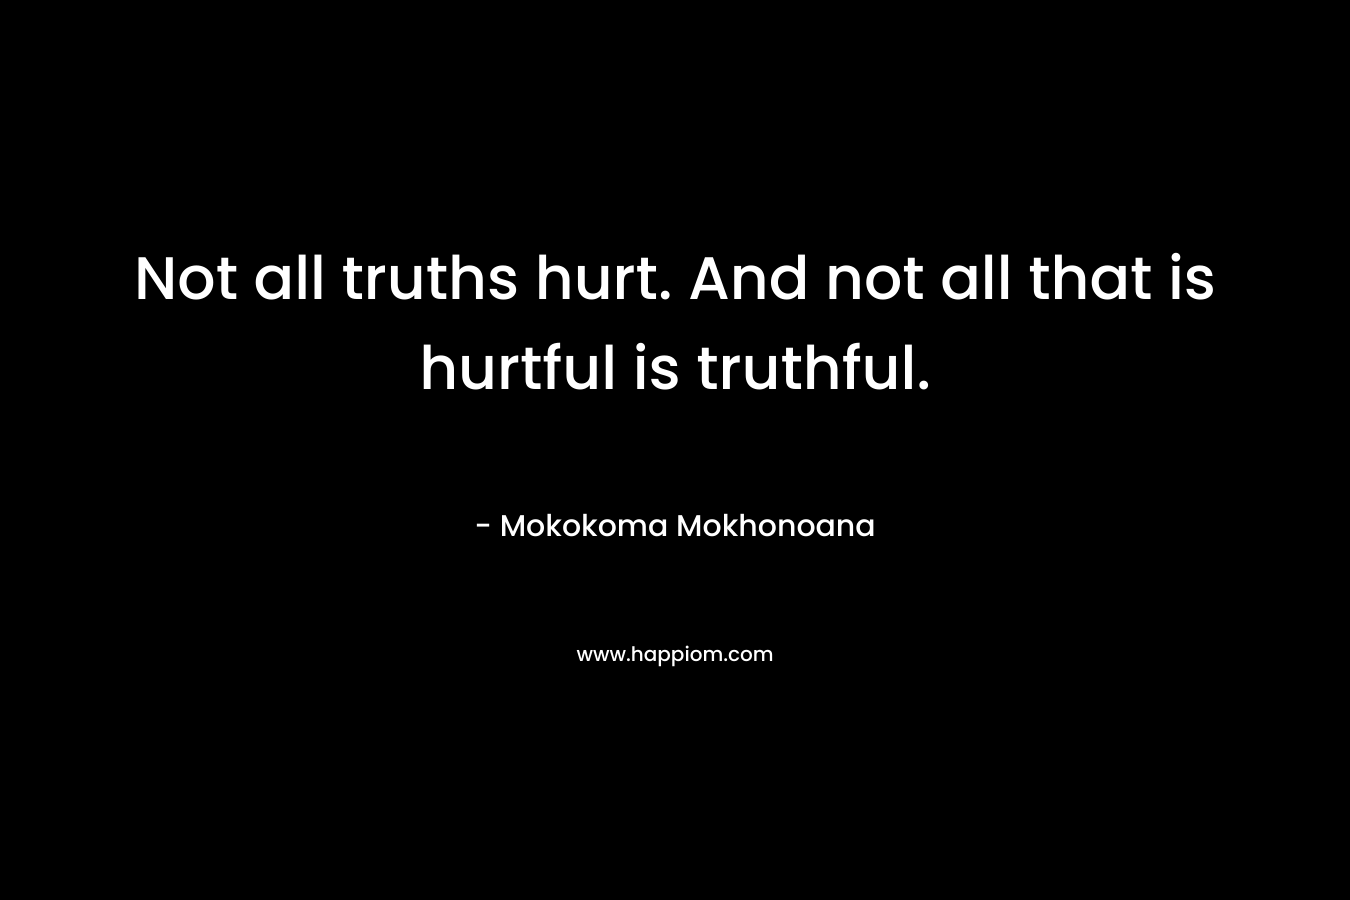 Not all truths hurt. And not all that is hurtful is truthful.